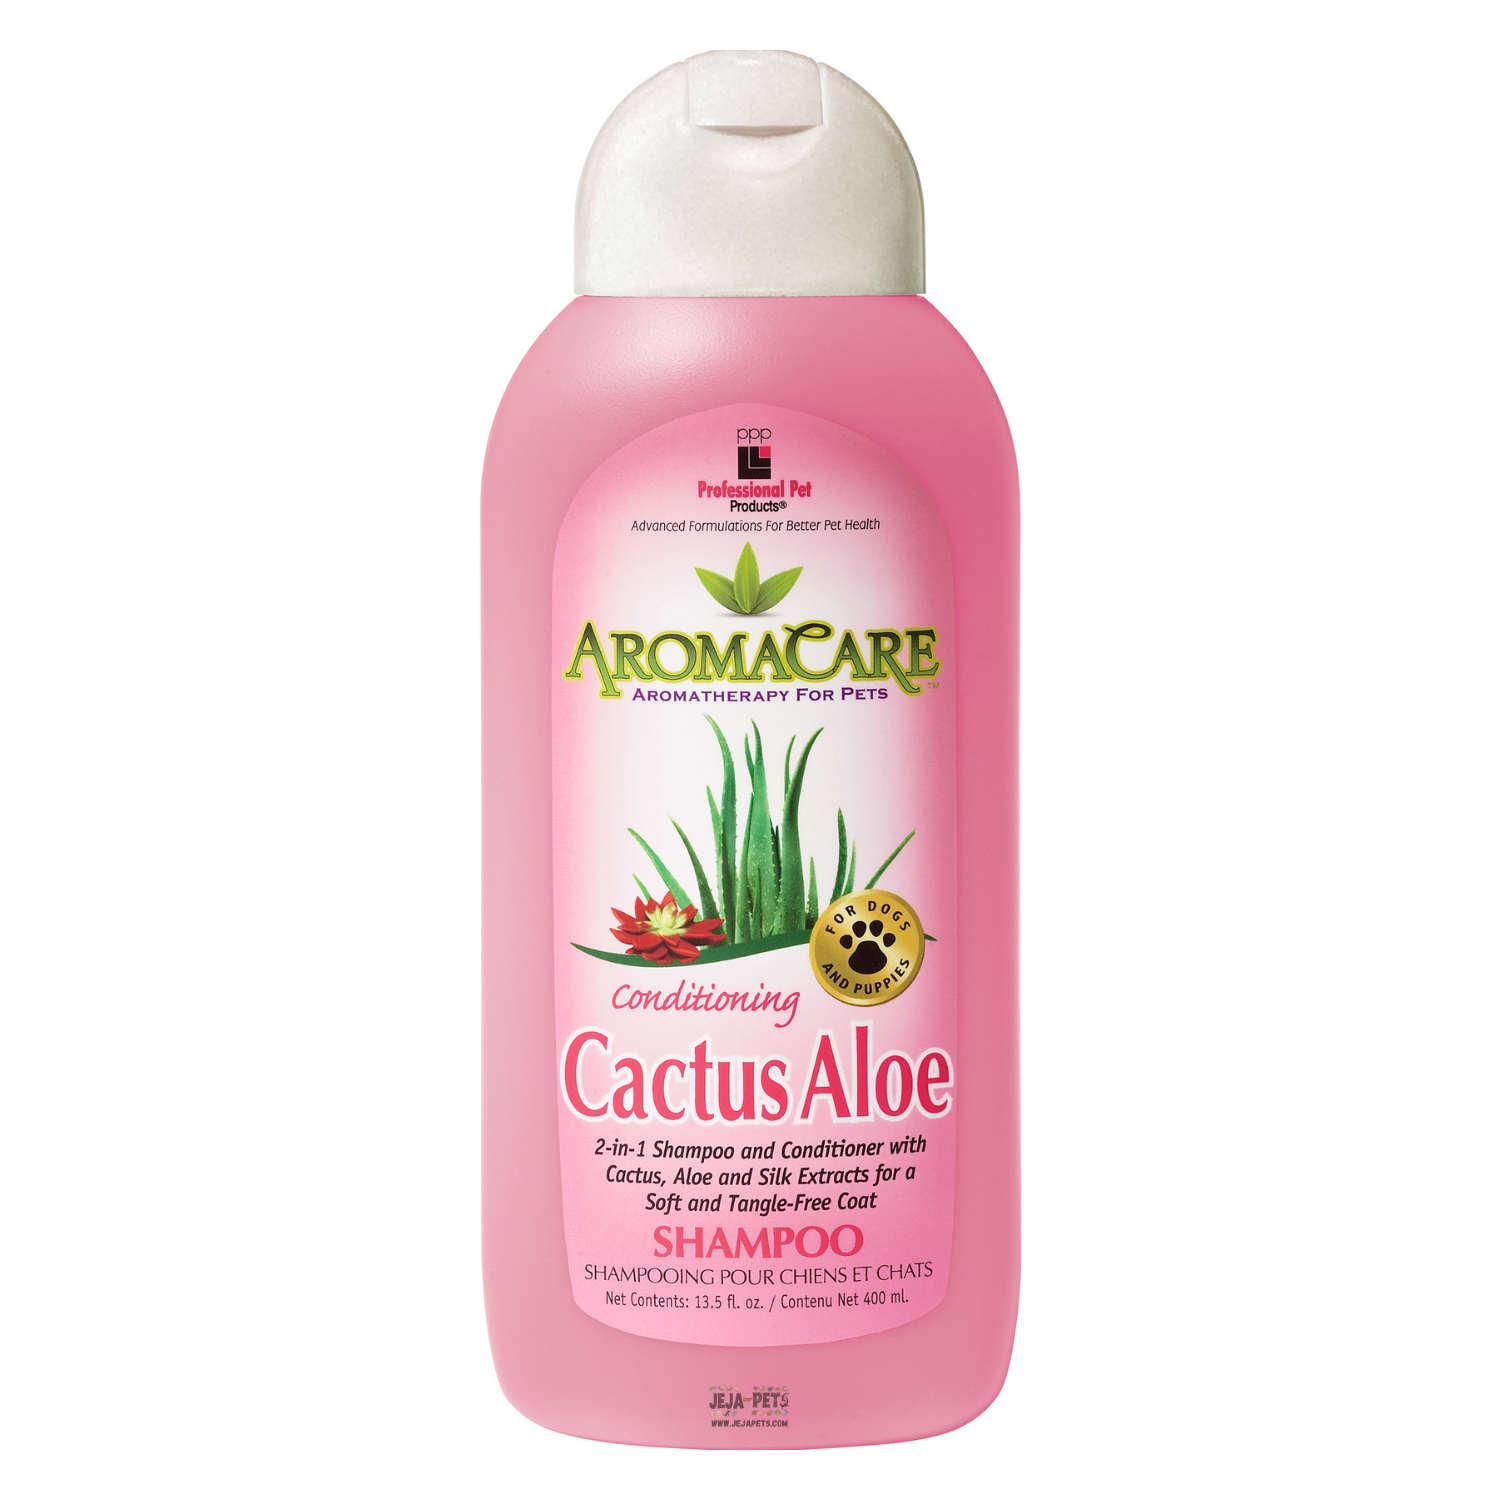 Professional Pet Products Aromacare Conditioning Cactus Aloe Shampoo - 399ml